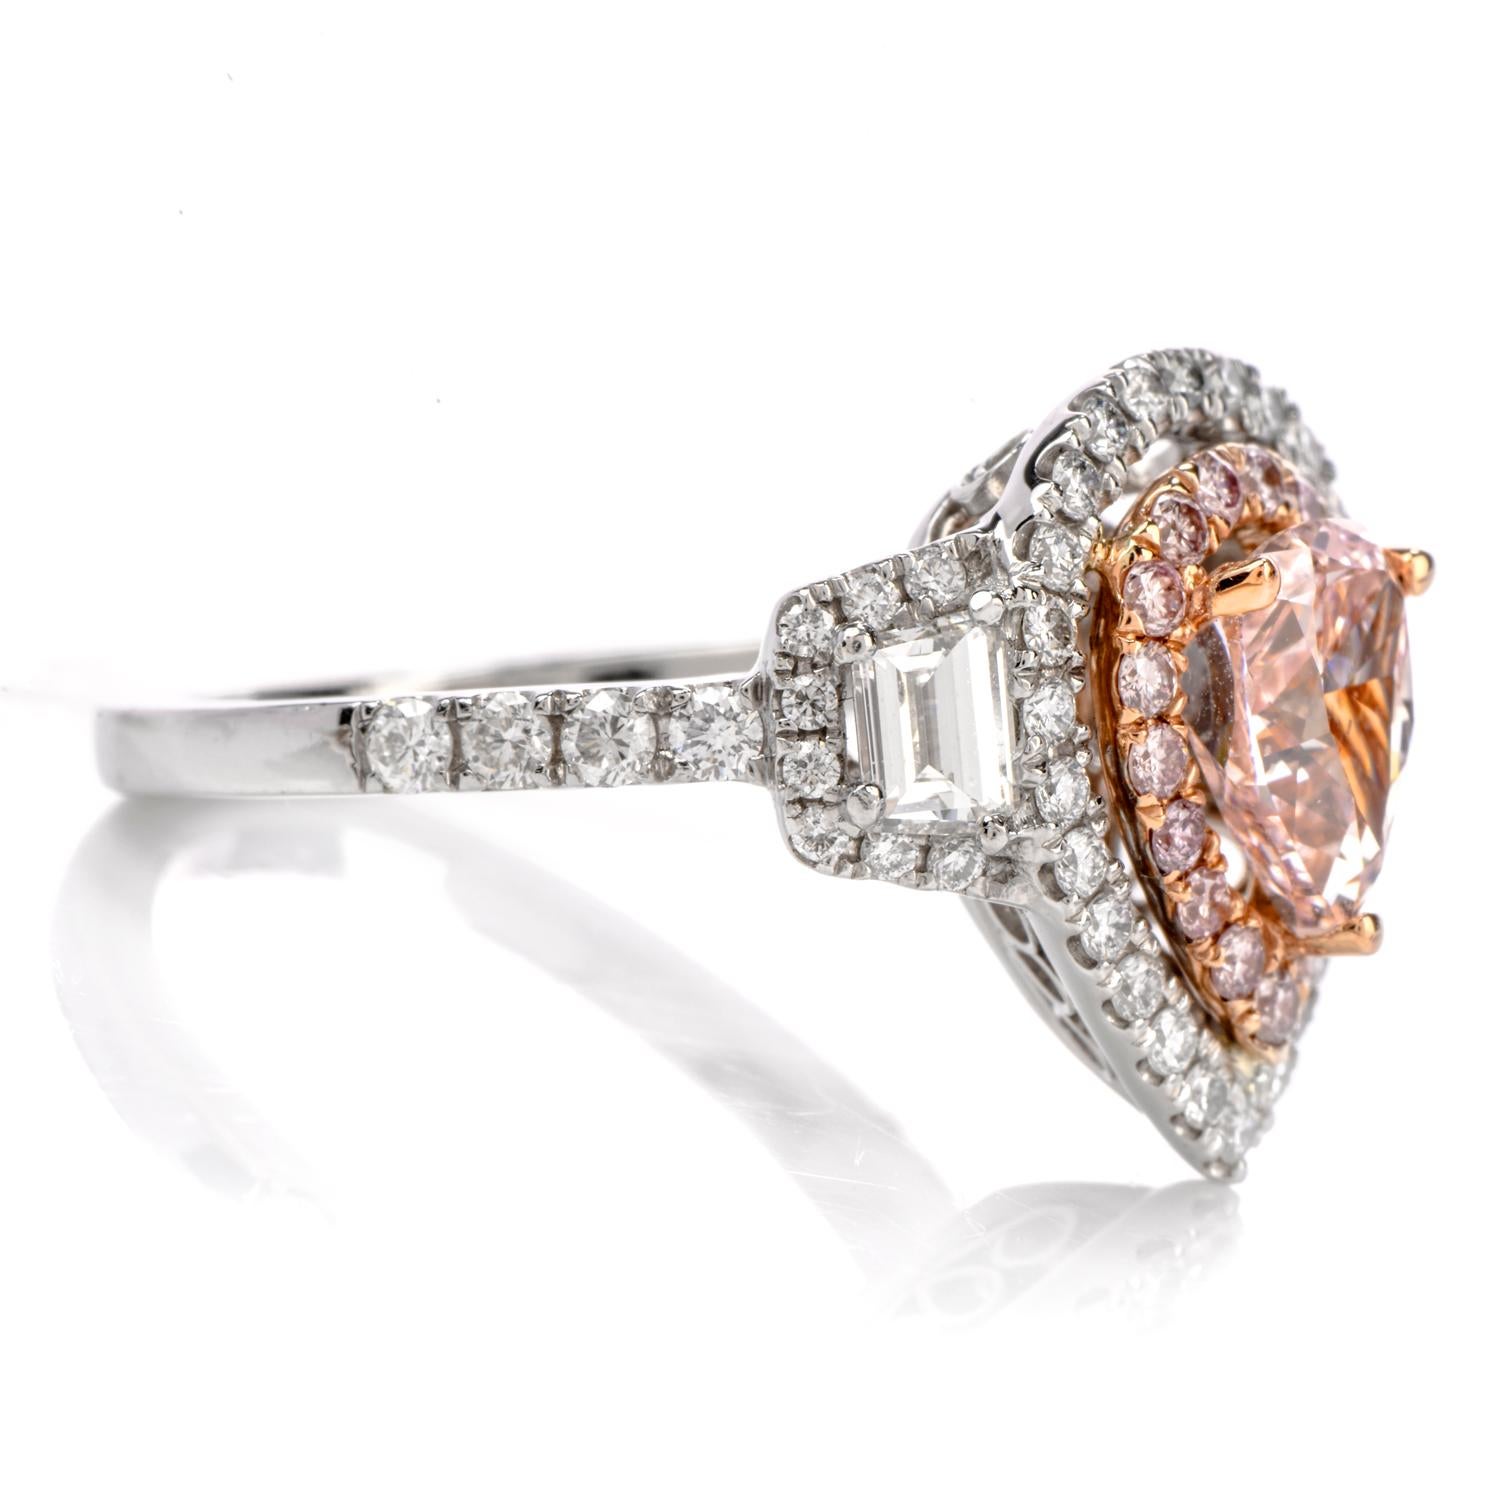 Tickle Her Pink with this vintage inspired Engagement RIng

crafted in luxurious Platinum.

Adorning the center is one pear shaped GIA certified Natural Fancy

Orangy Pink pear shaped diamond measuring appx. 7.28 x 5.07 x 3.74mm and

weighing appx.